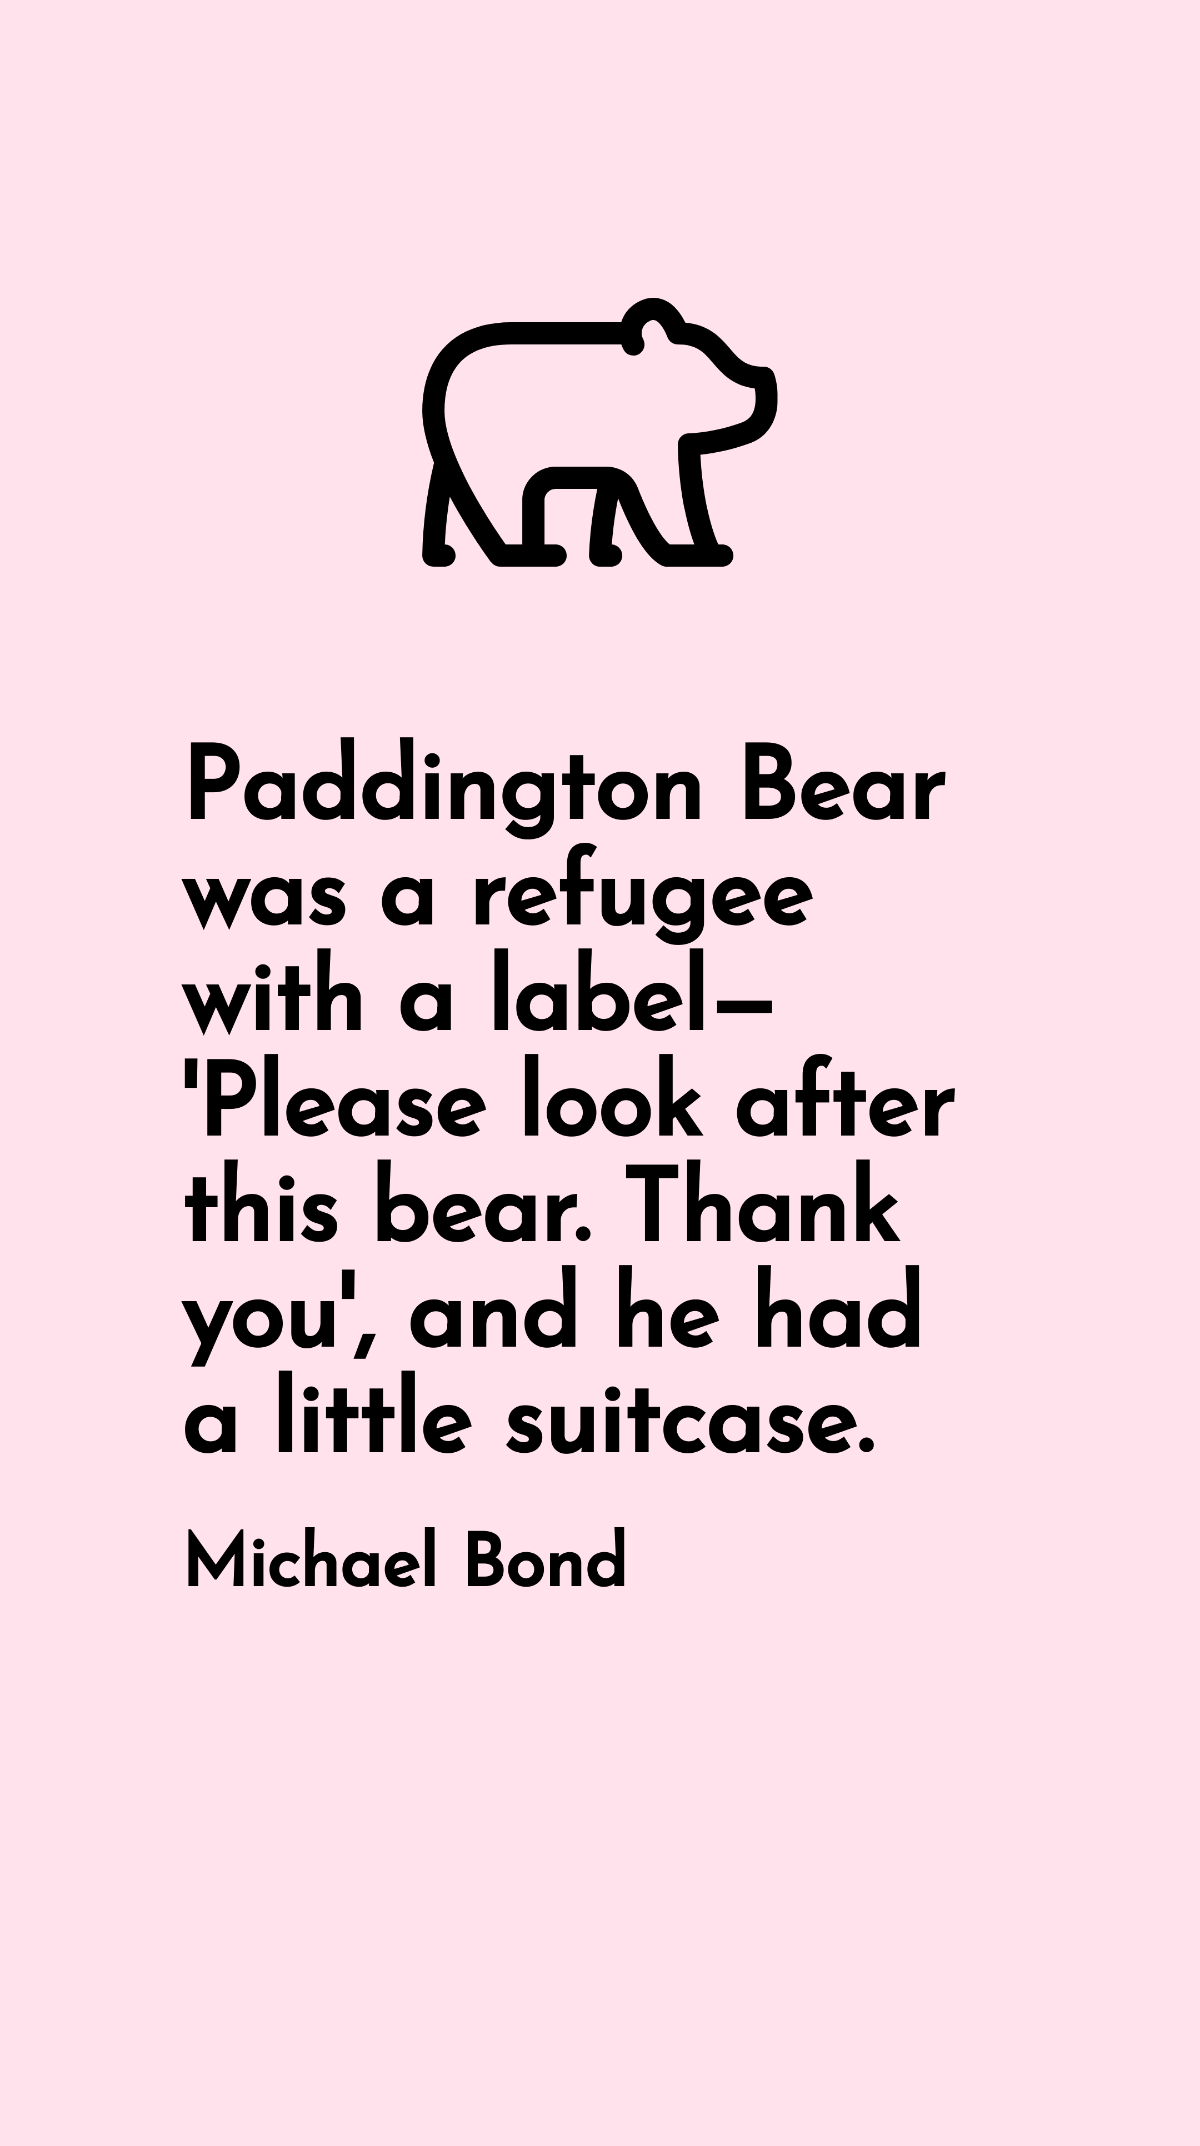 Michael Bond - Paddington Bear was a refugee with a label - 'Please look after this bear. Thank you', and he had a little suitcase. Template